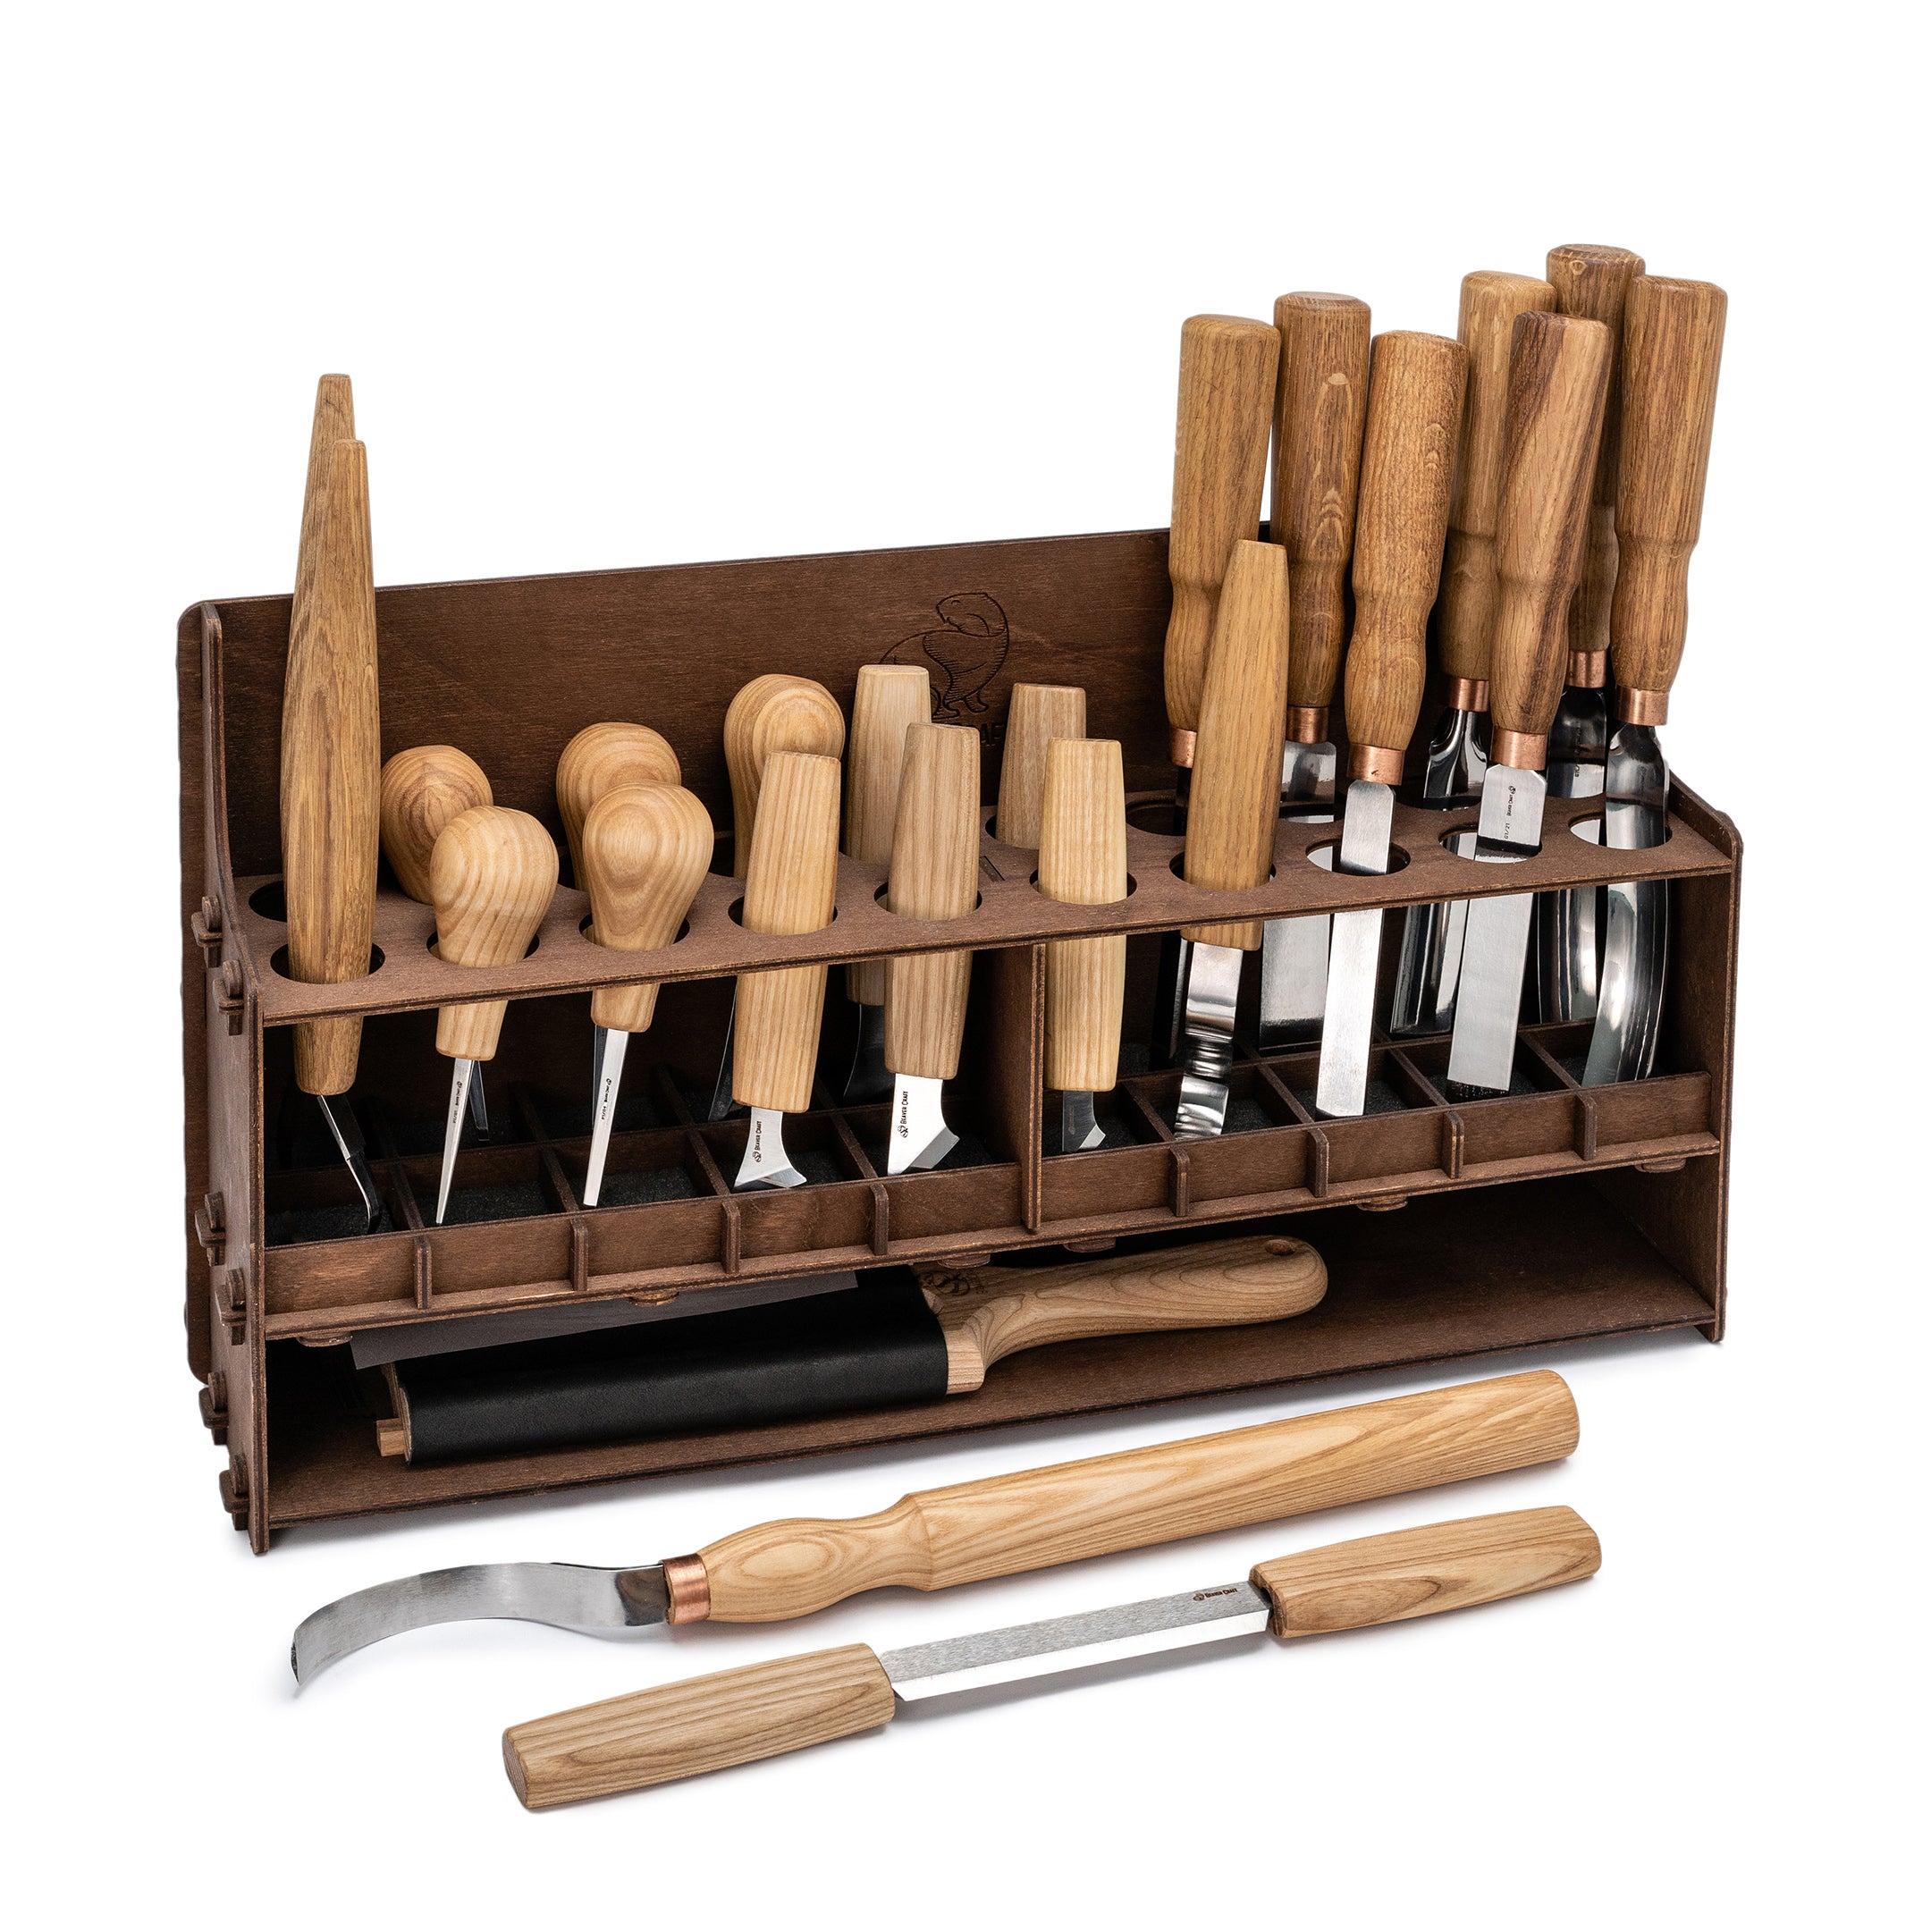 S70L – Extended Wood Carving Set of Knives, Chisels, Gouges, and Sharpening Accessories in a Tool Holder (left-handed)